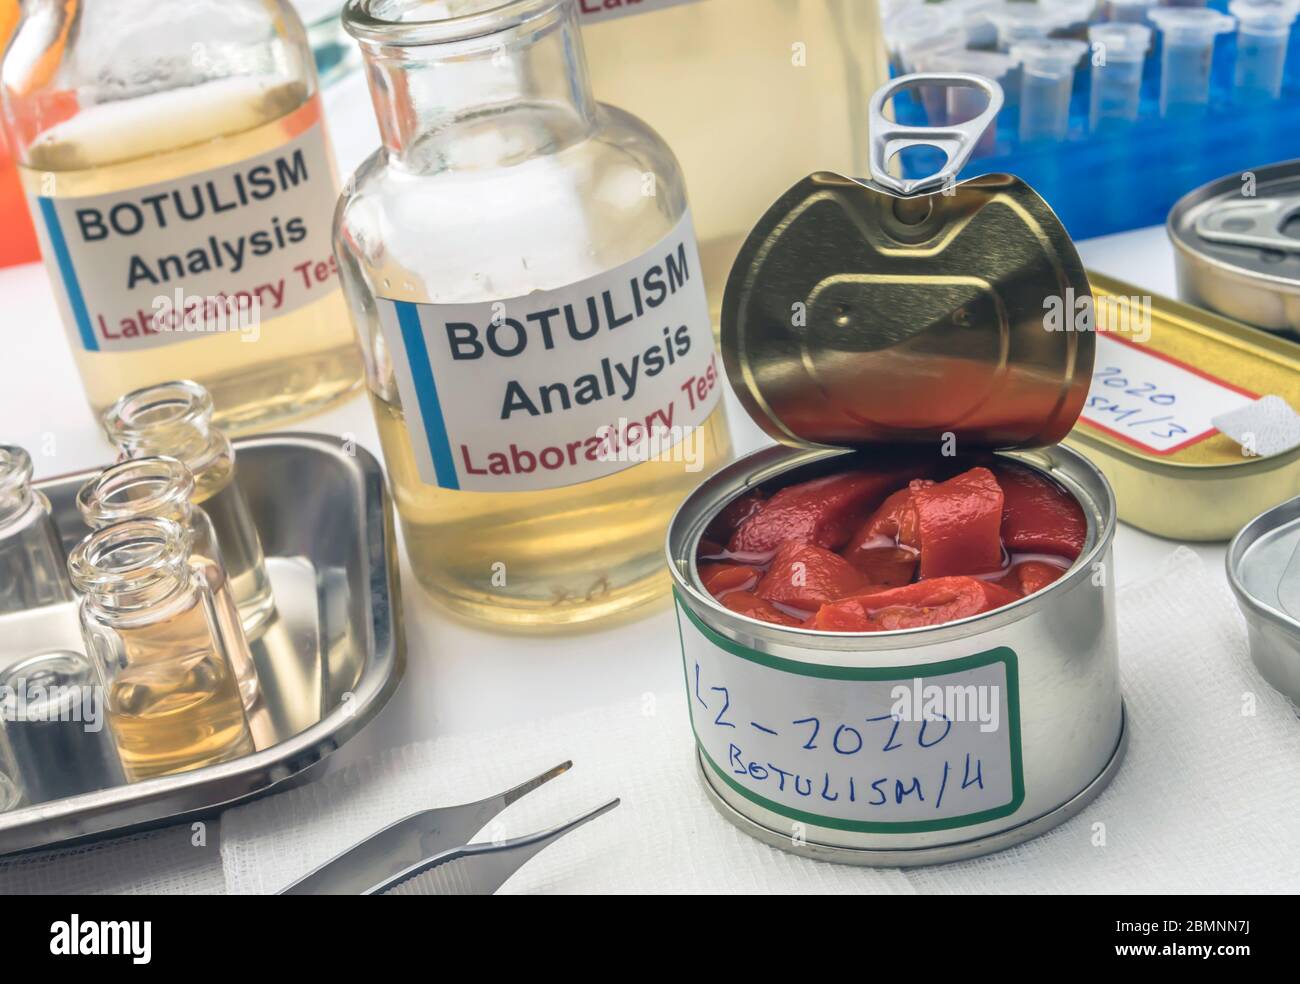 Experienced laboratory scientist analyzes red peppers from a canned food can to analyze botulism infection in sick people, conceptual image Stock Photo